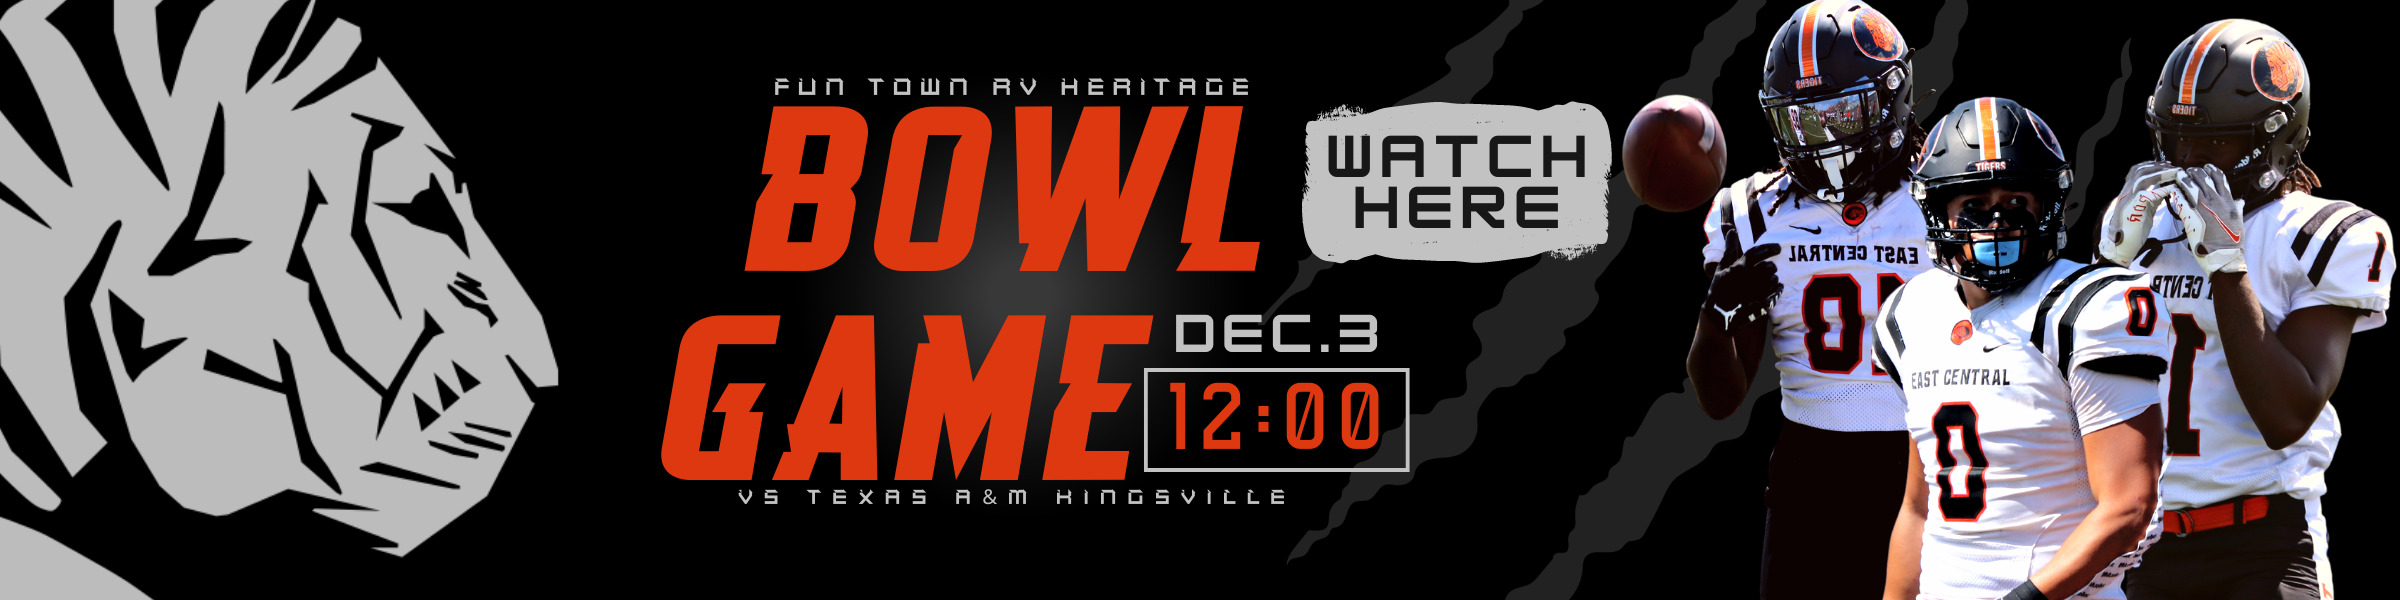 Football Bowl Game Watch Link